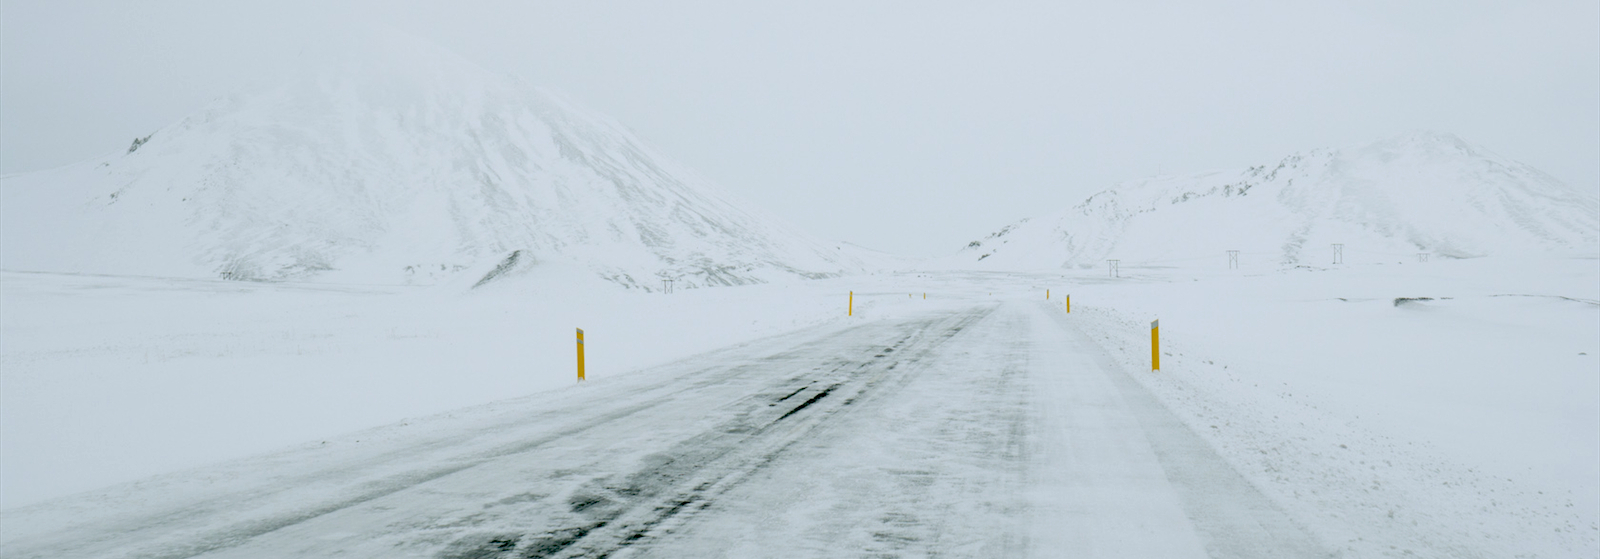 Driving on winter roads in Iceland